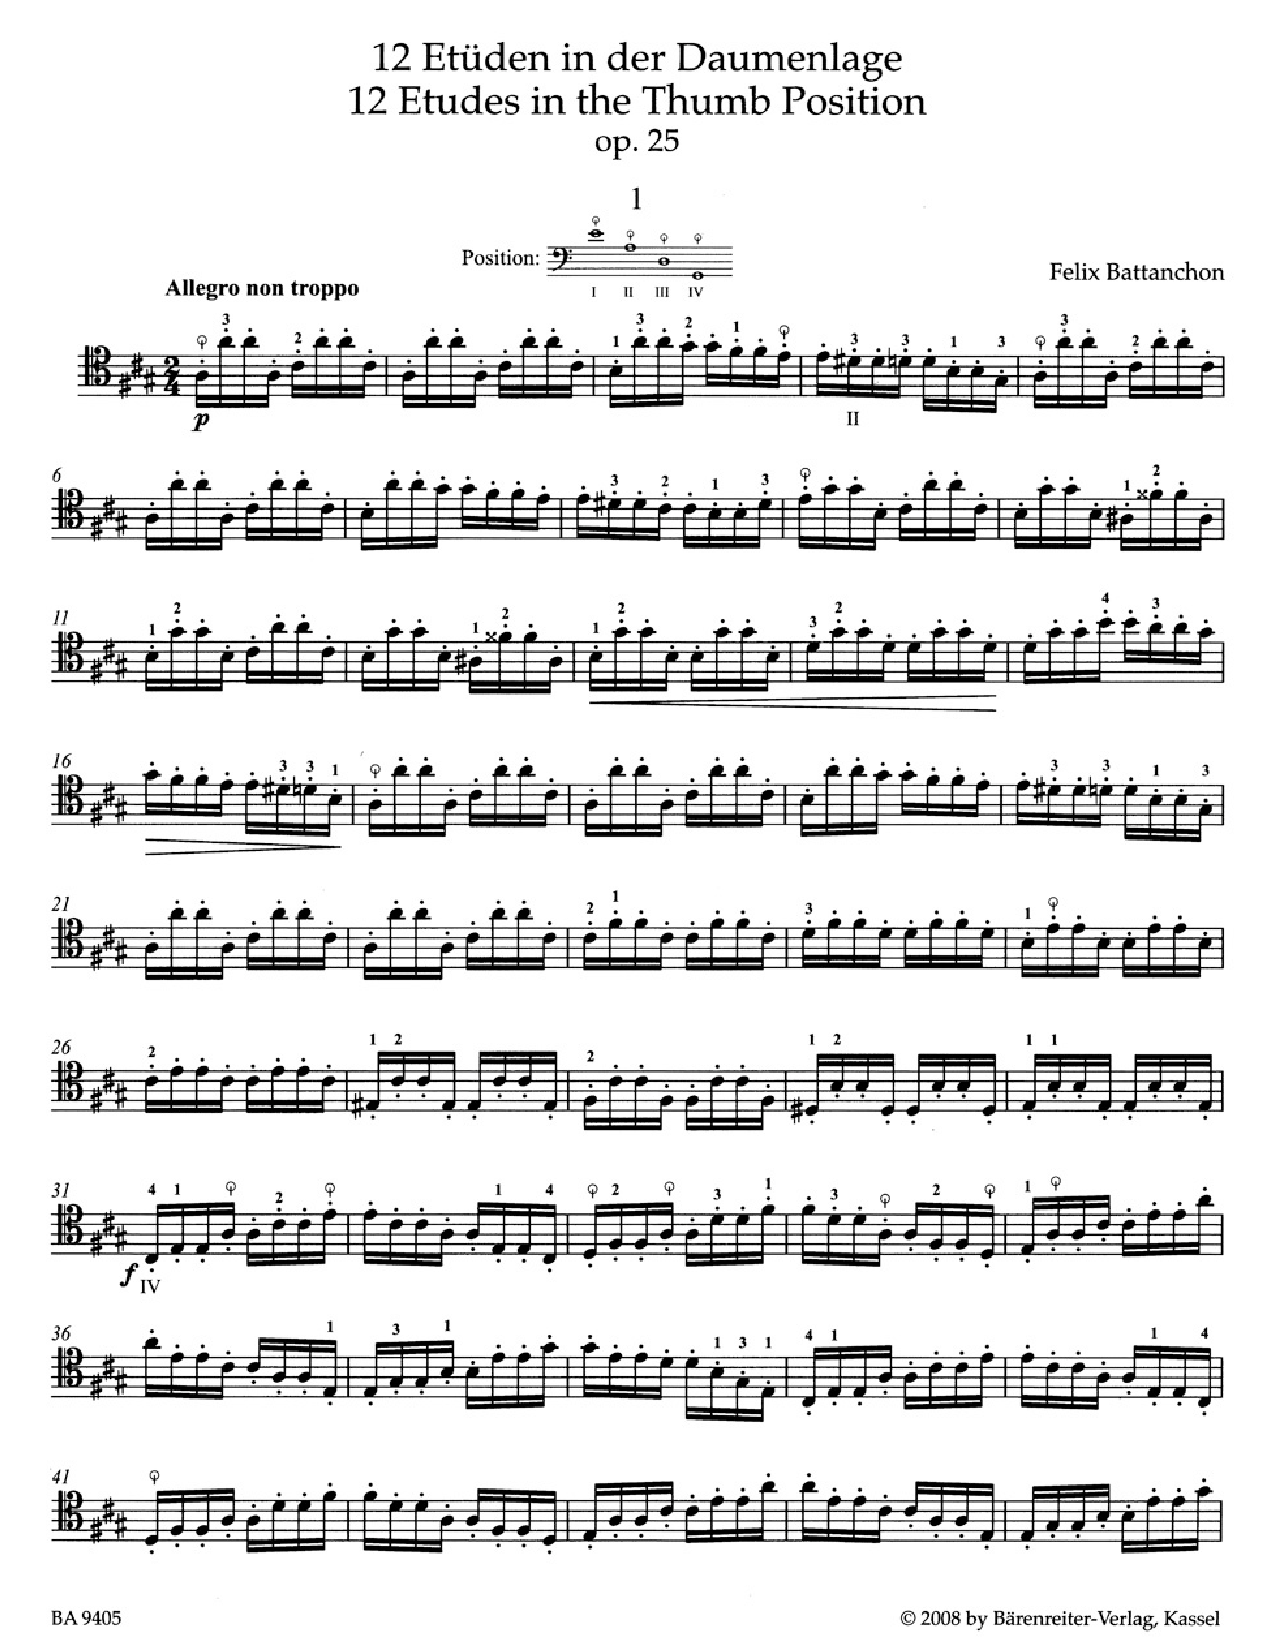 12 ETUDES IN THE THUMB POSITION OP #25 CELLO